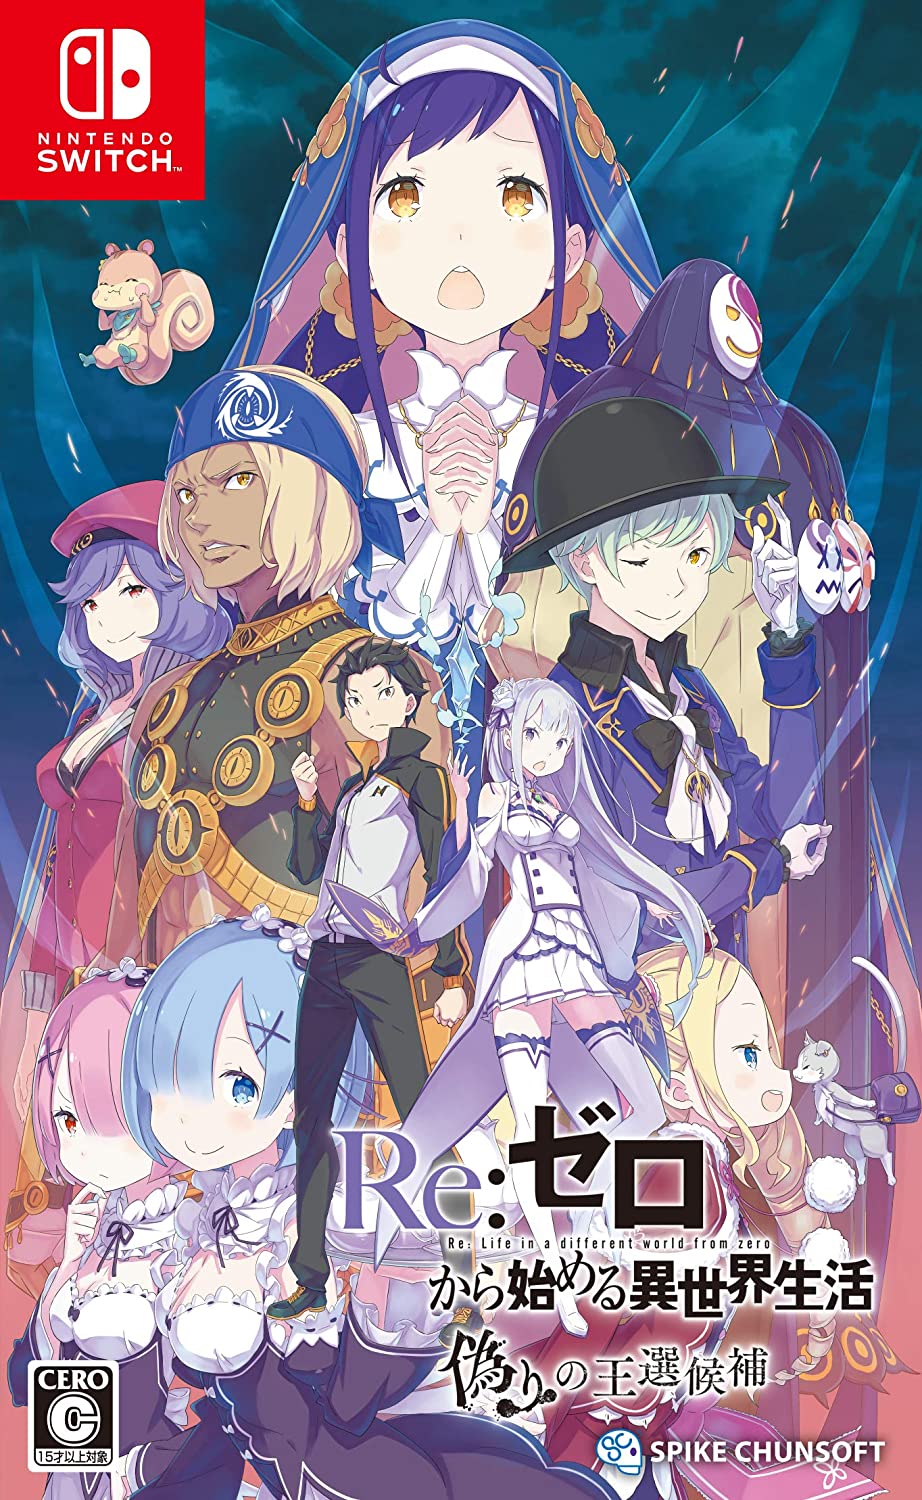 Re:Zero − Starting Life in Another World: The Prophecy of the Throne -  Wikipedia